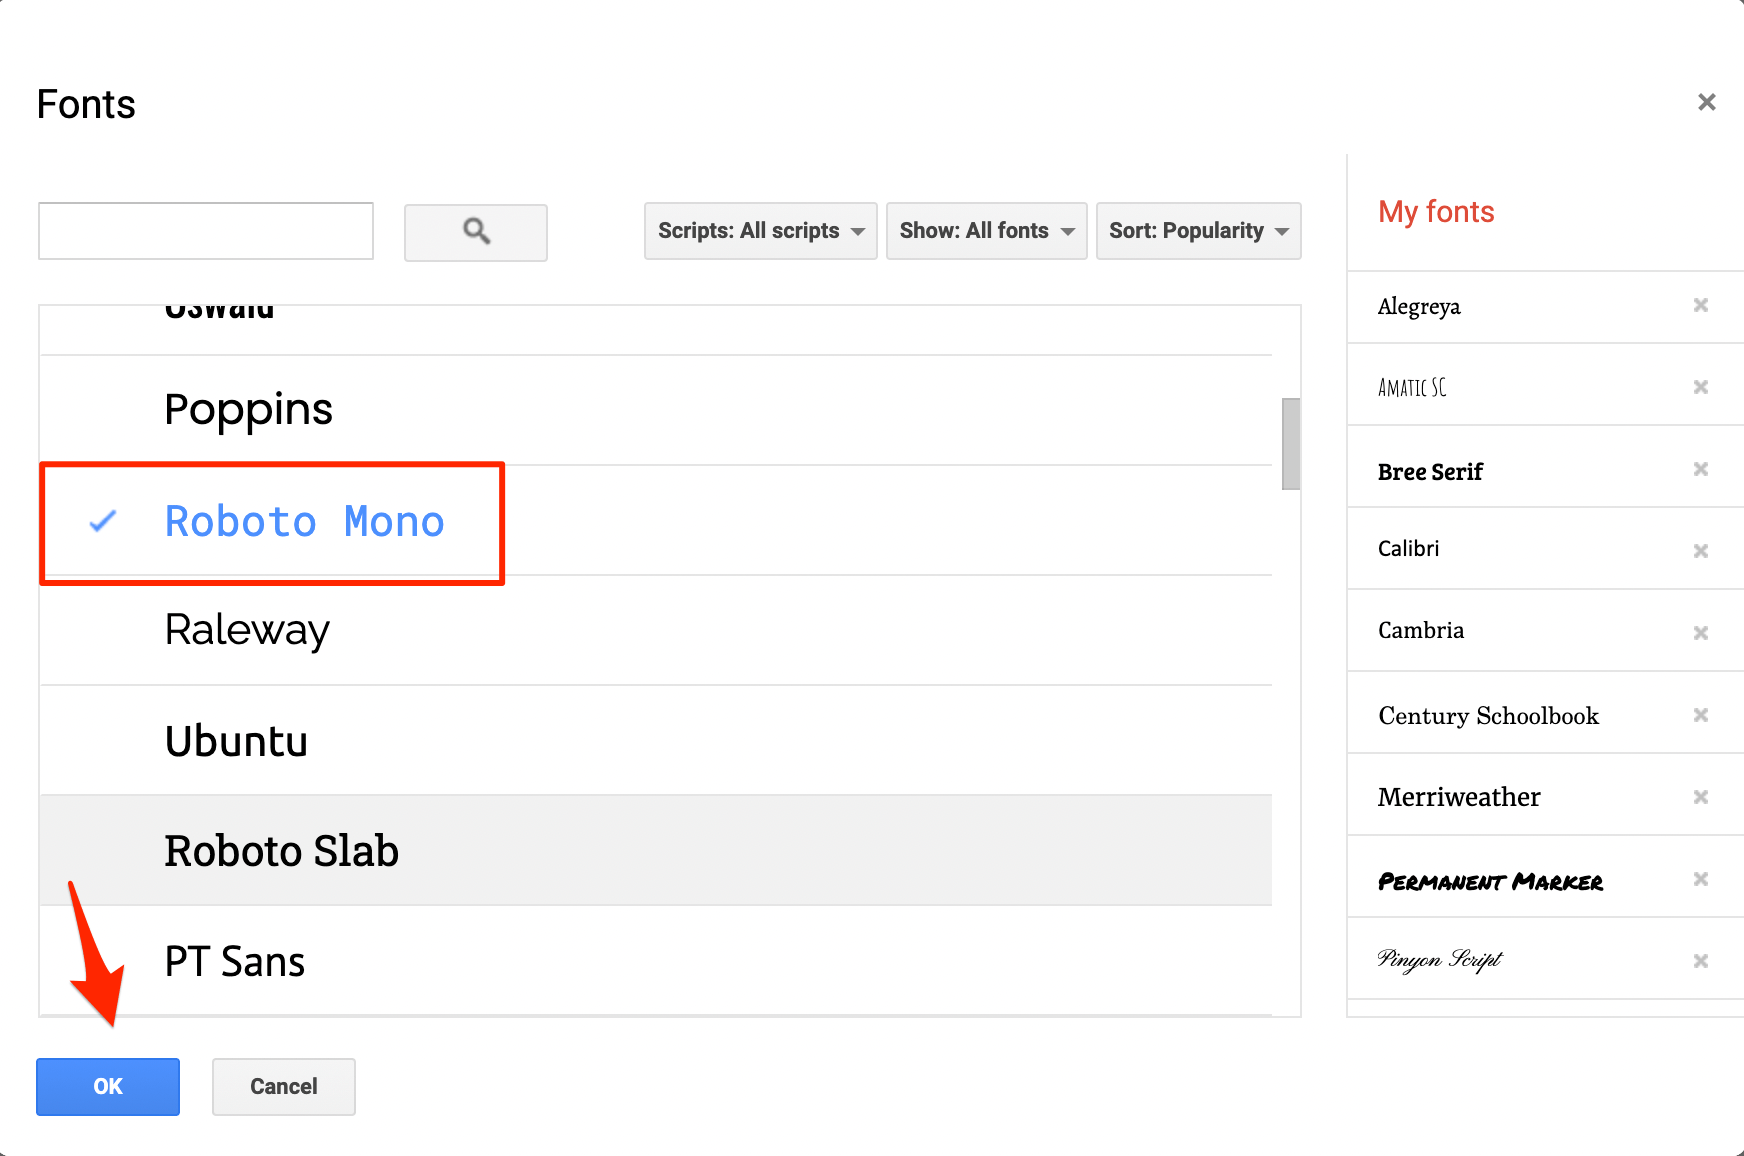 Select the font and click on the OK button. The chosen font will be added to the main fonts section of the Google slide